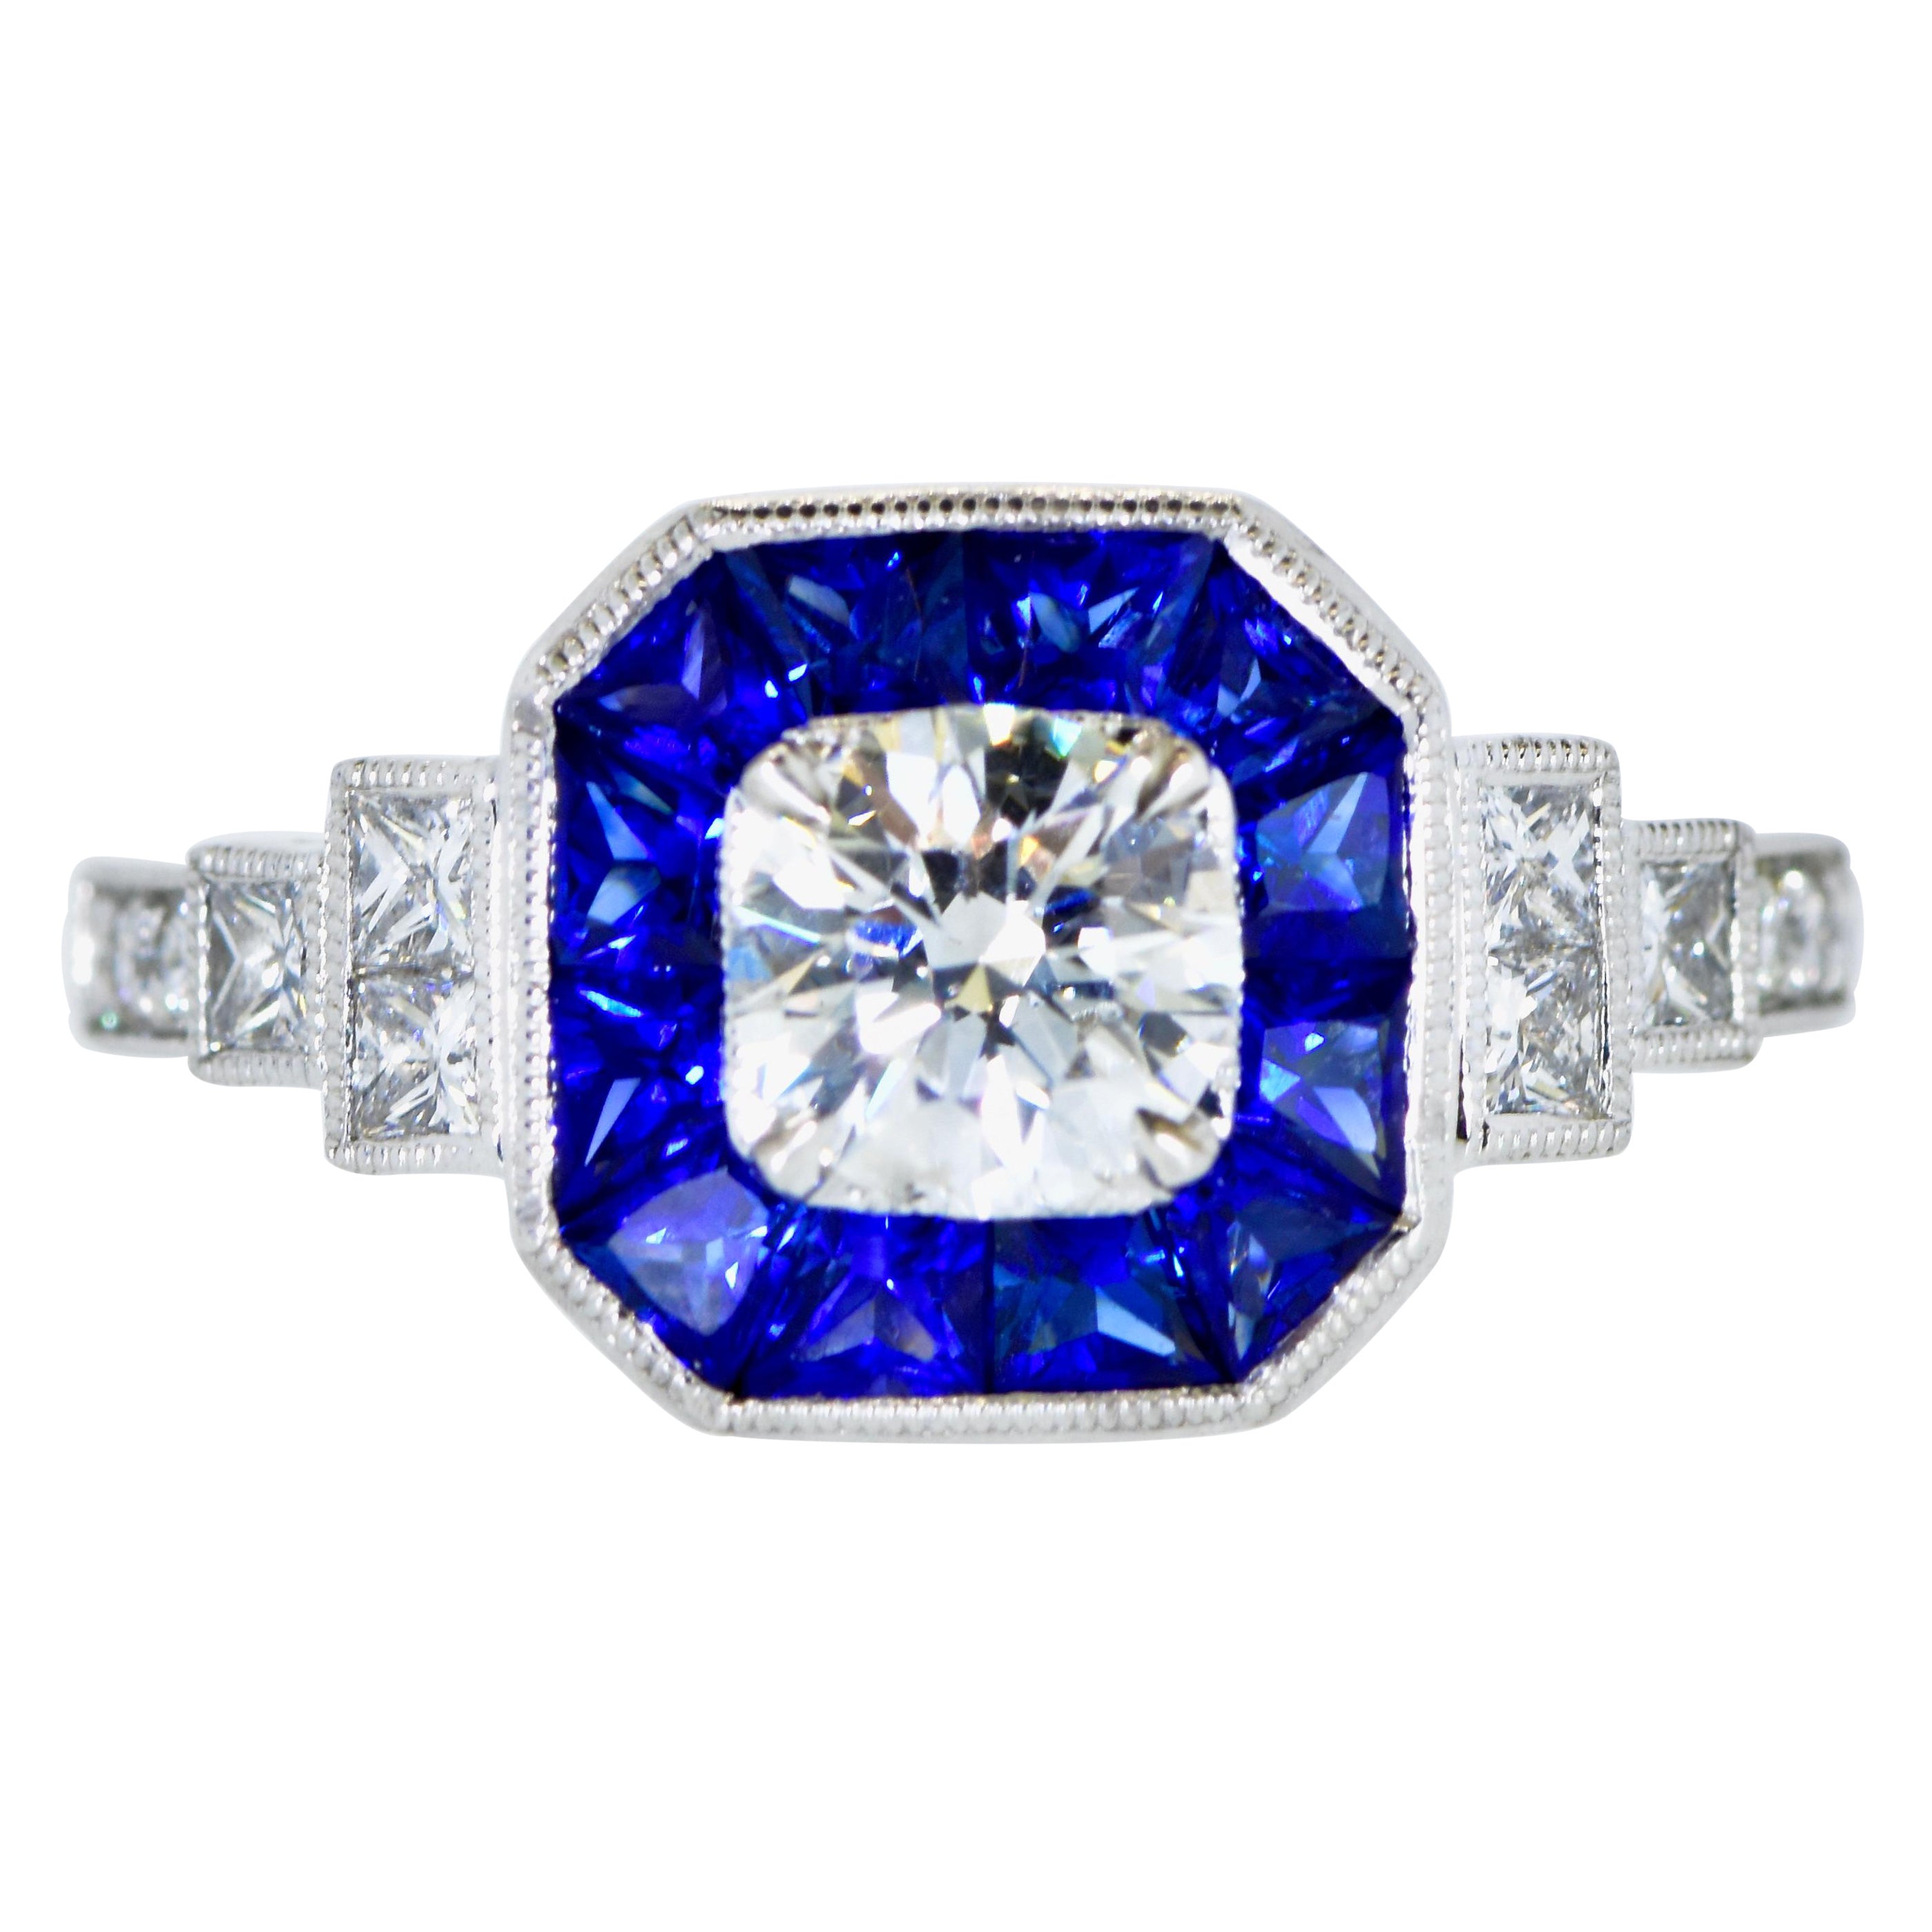 Diamond and fine natural royal blue sapphire and white gold contemporary new ring.  18K (marked 750), white gold well made ring possessing 12 fancy cut natural excellent color bright blue sapphires - not too light nor too dark - weighing an